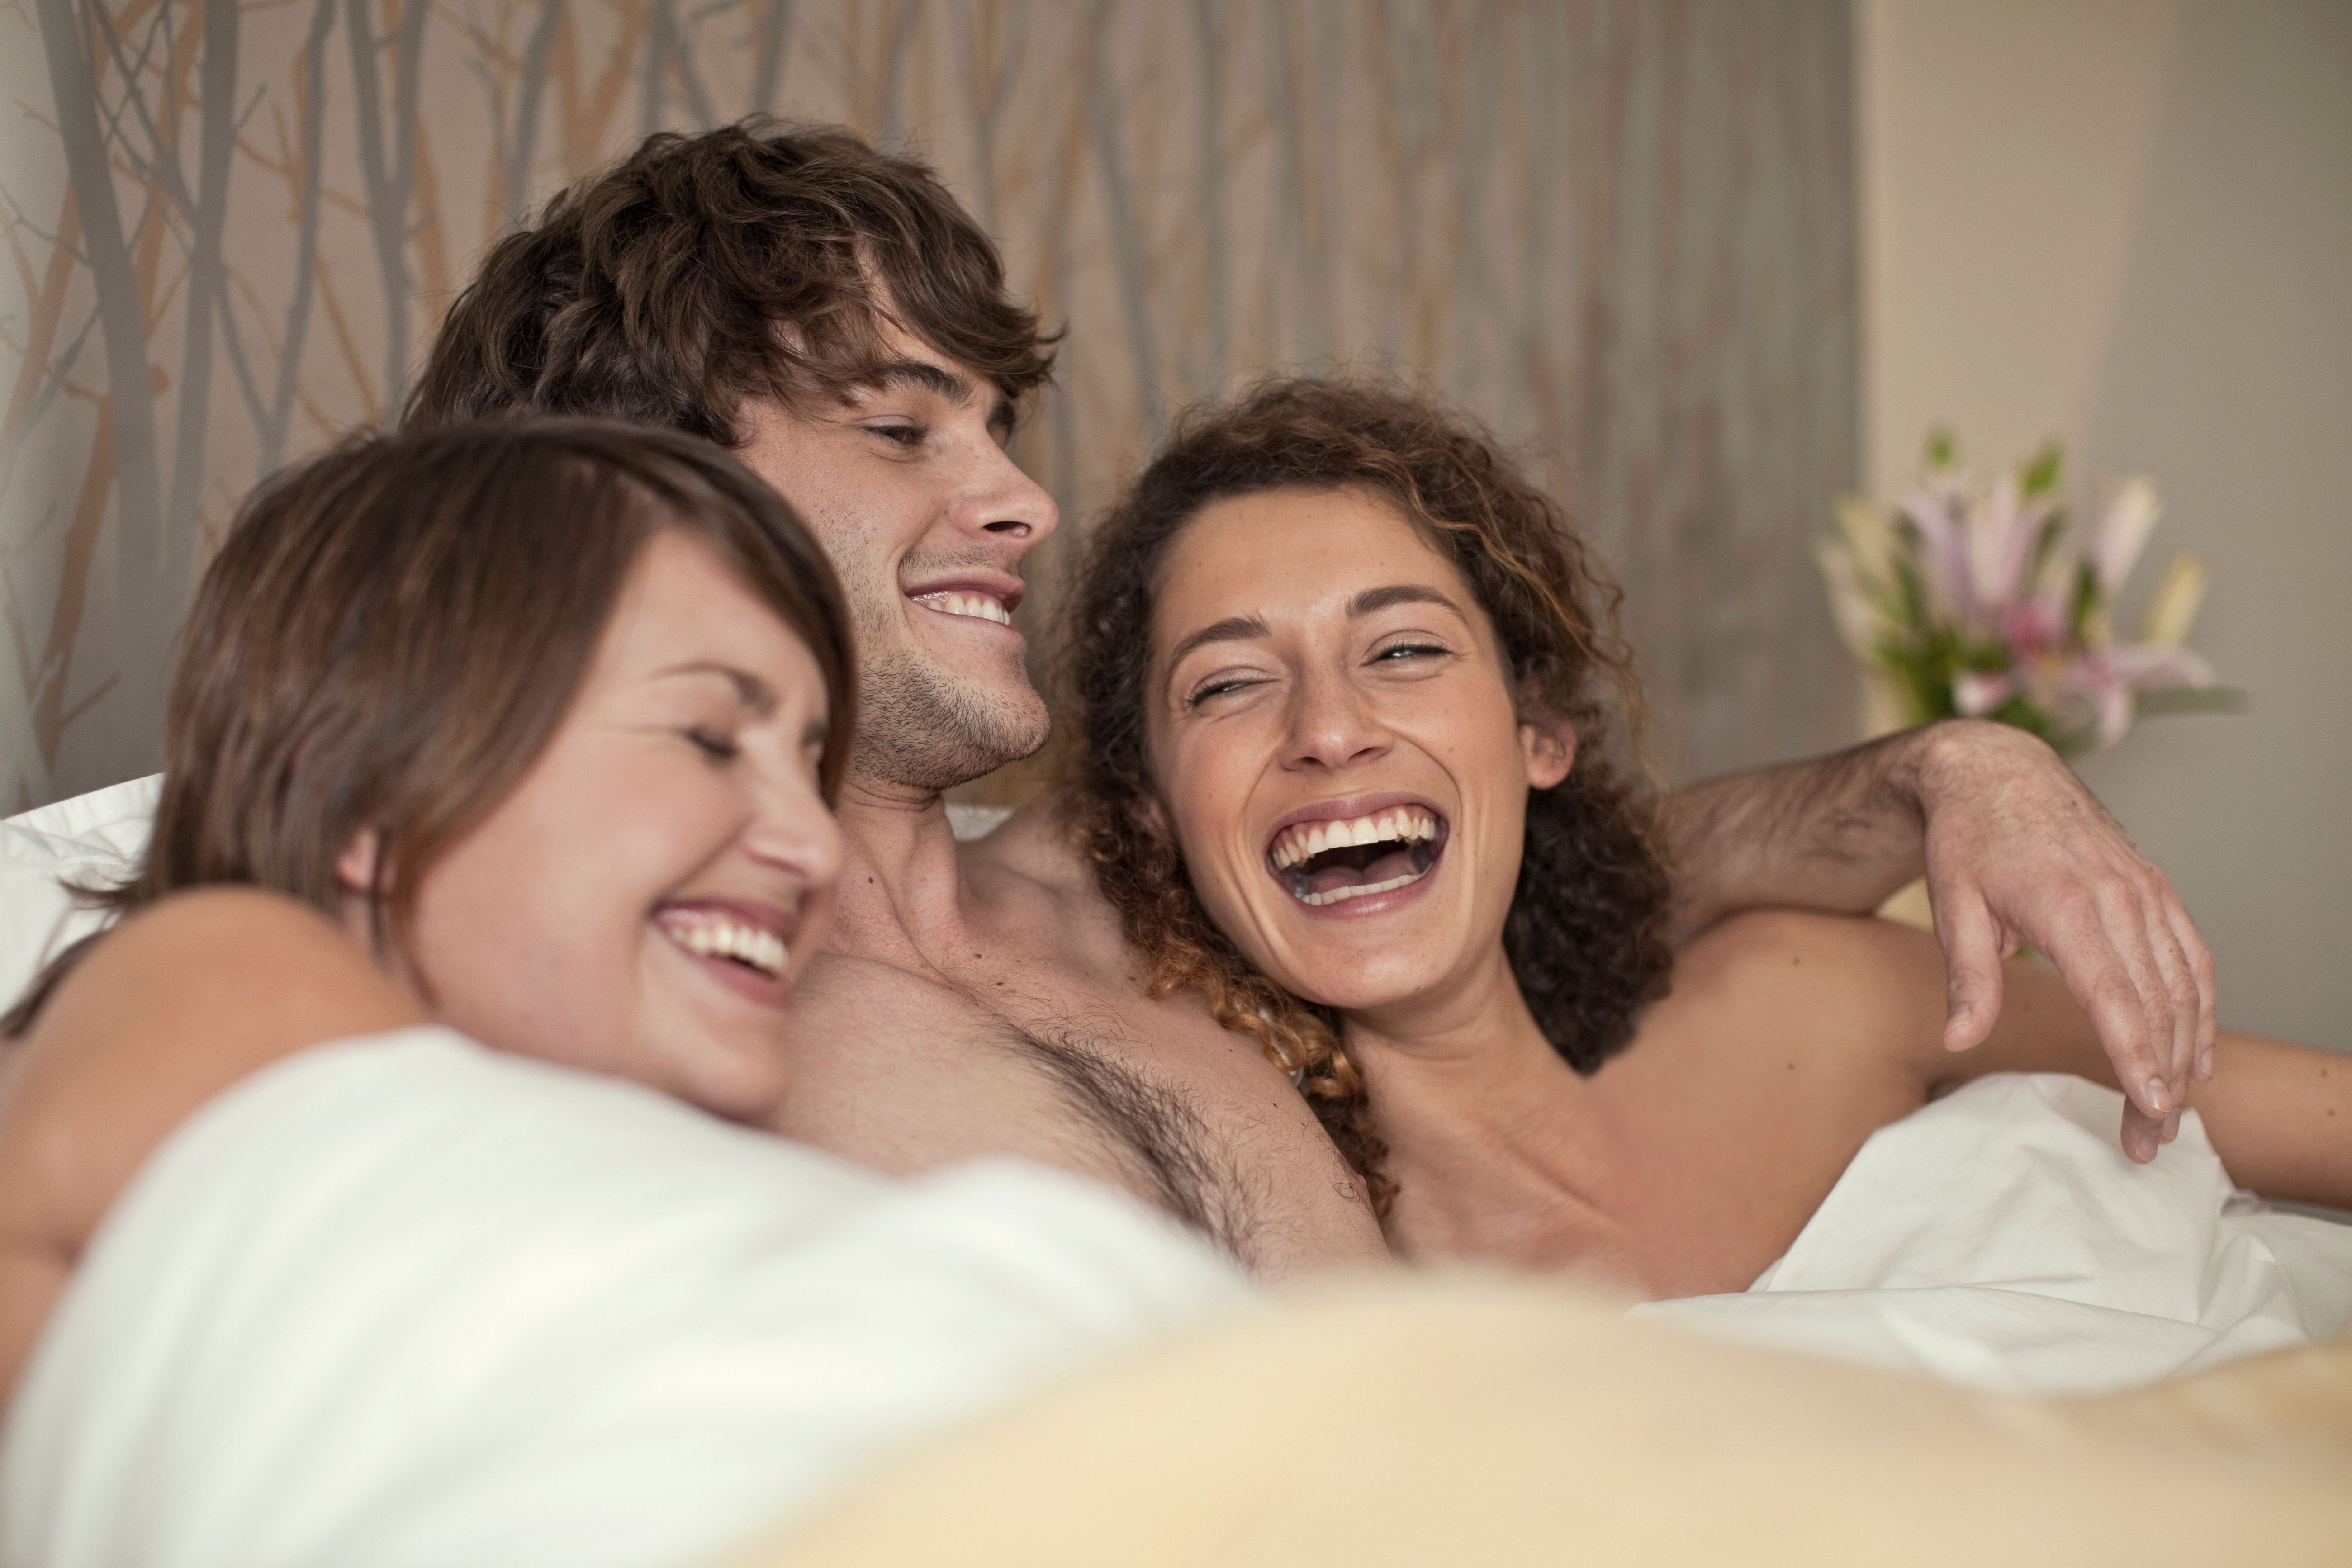 How to Have a Great Threesome, According to People Whove Done It